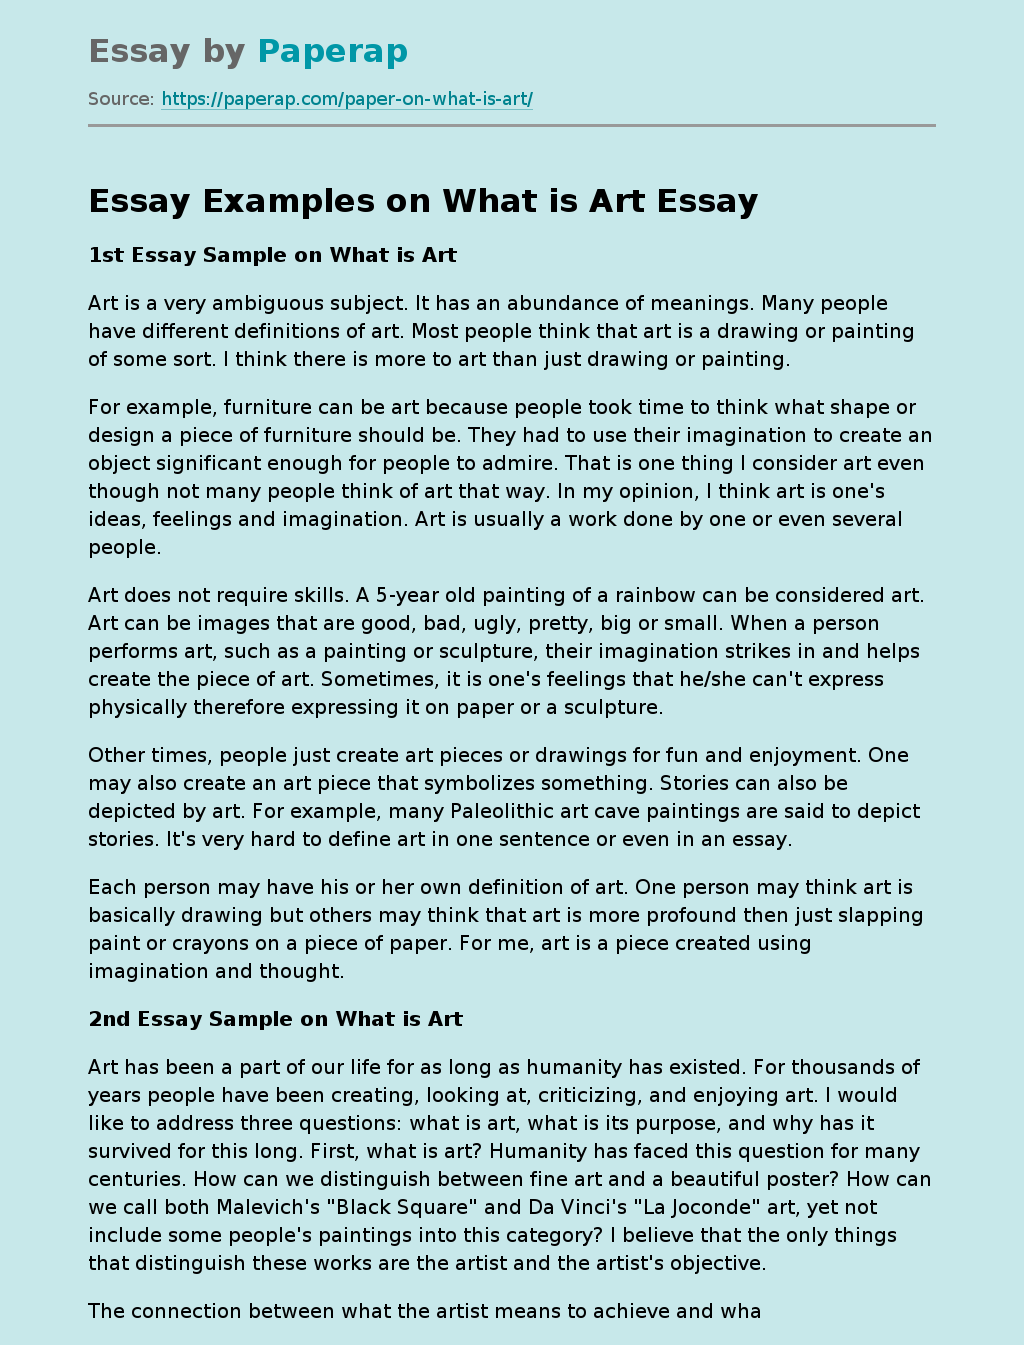 Essay Examples on What is Art